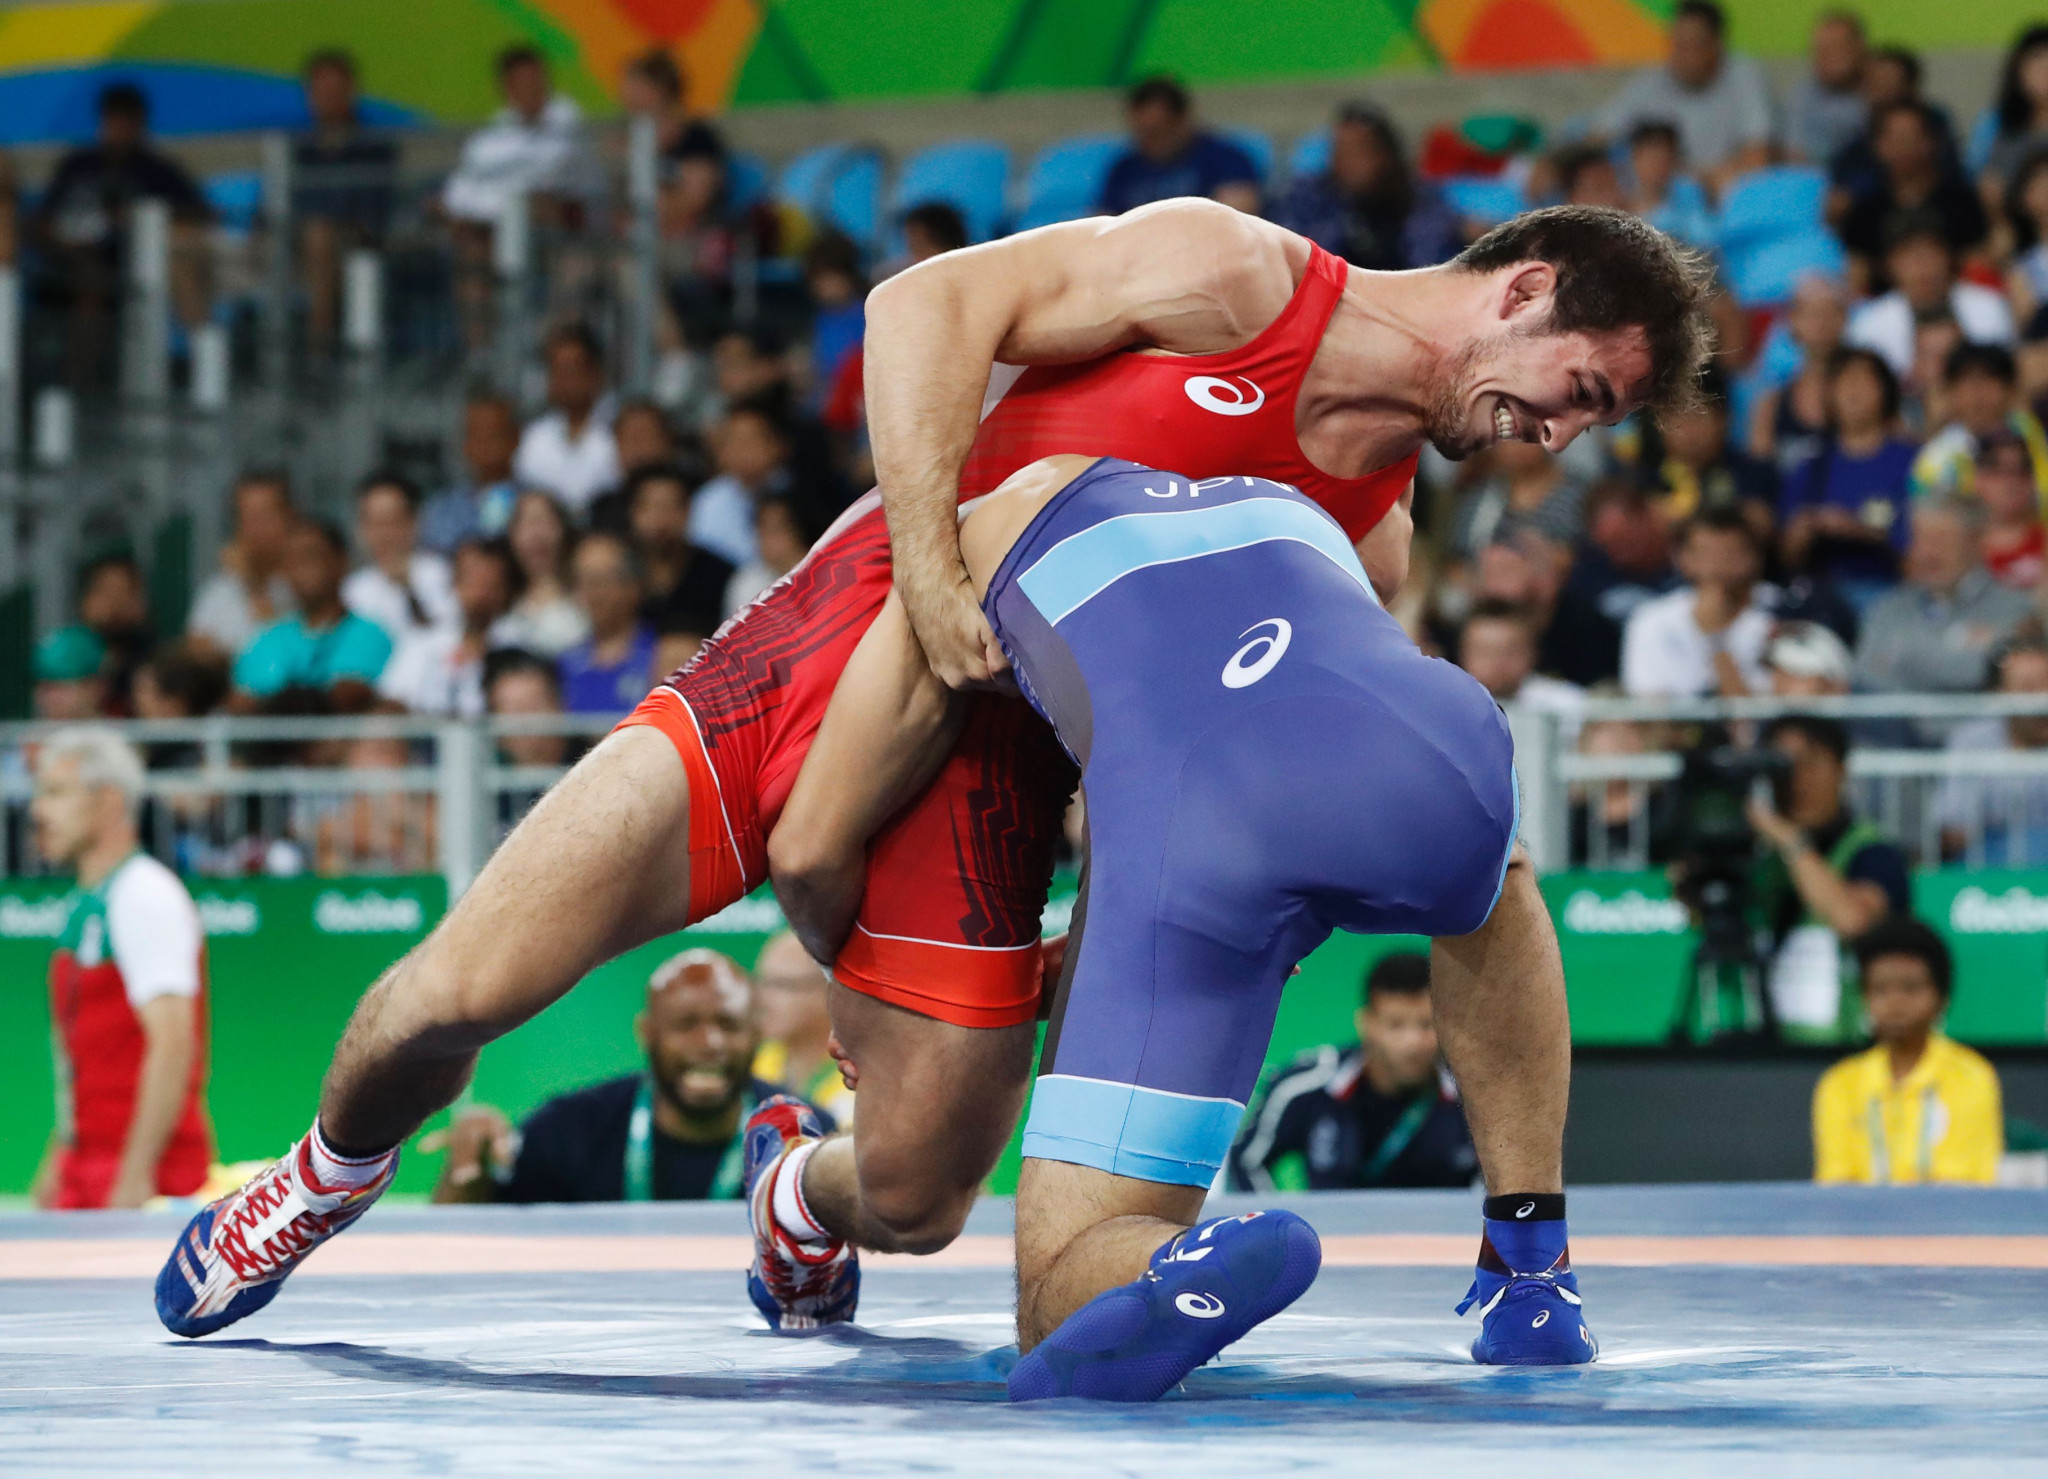 Wrestling webinars have averaged viewers of around 160 people since June ©Getty Images